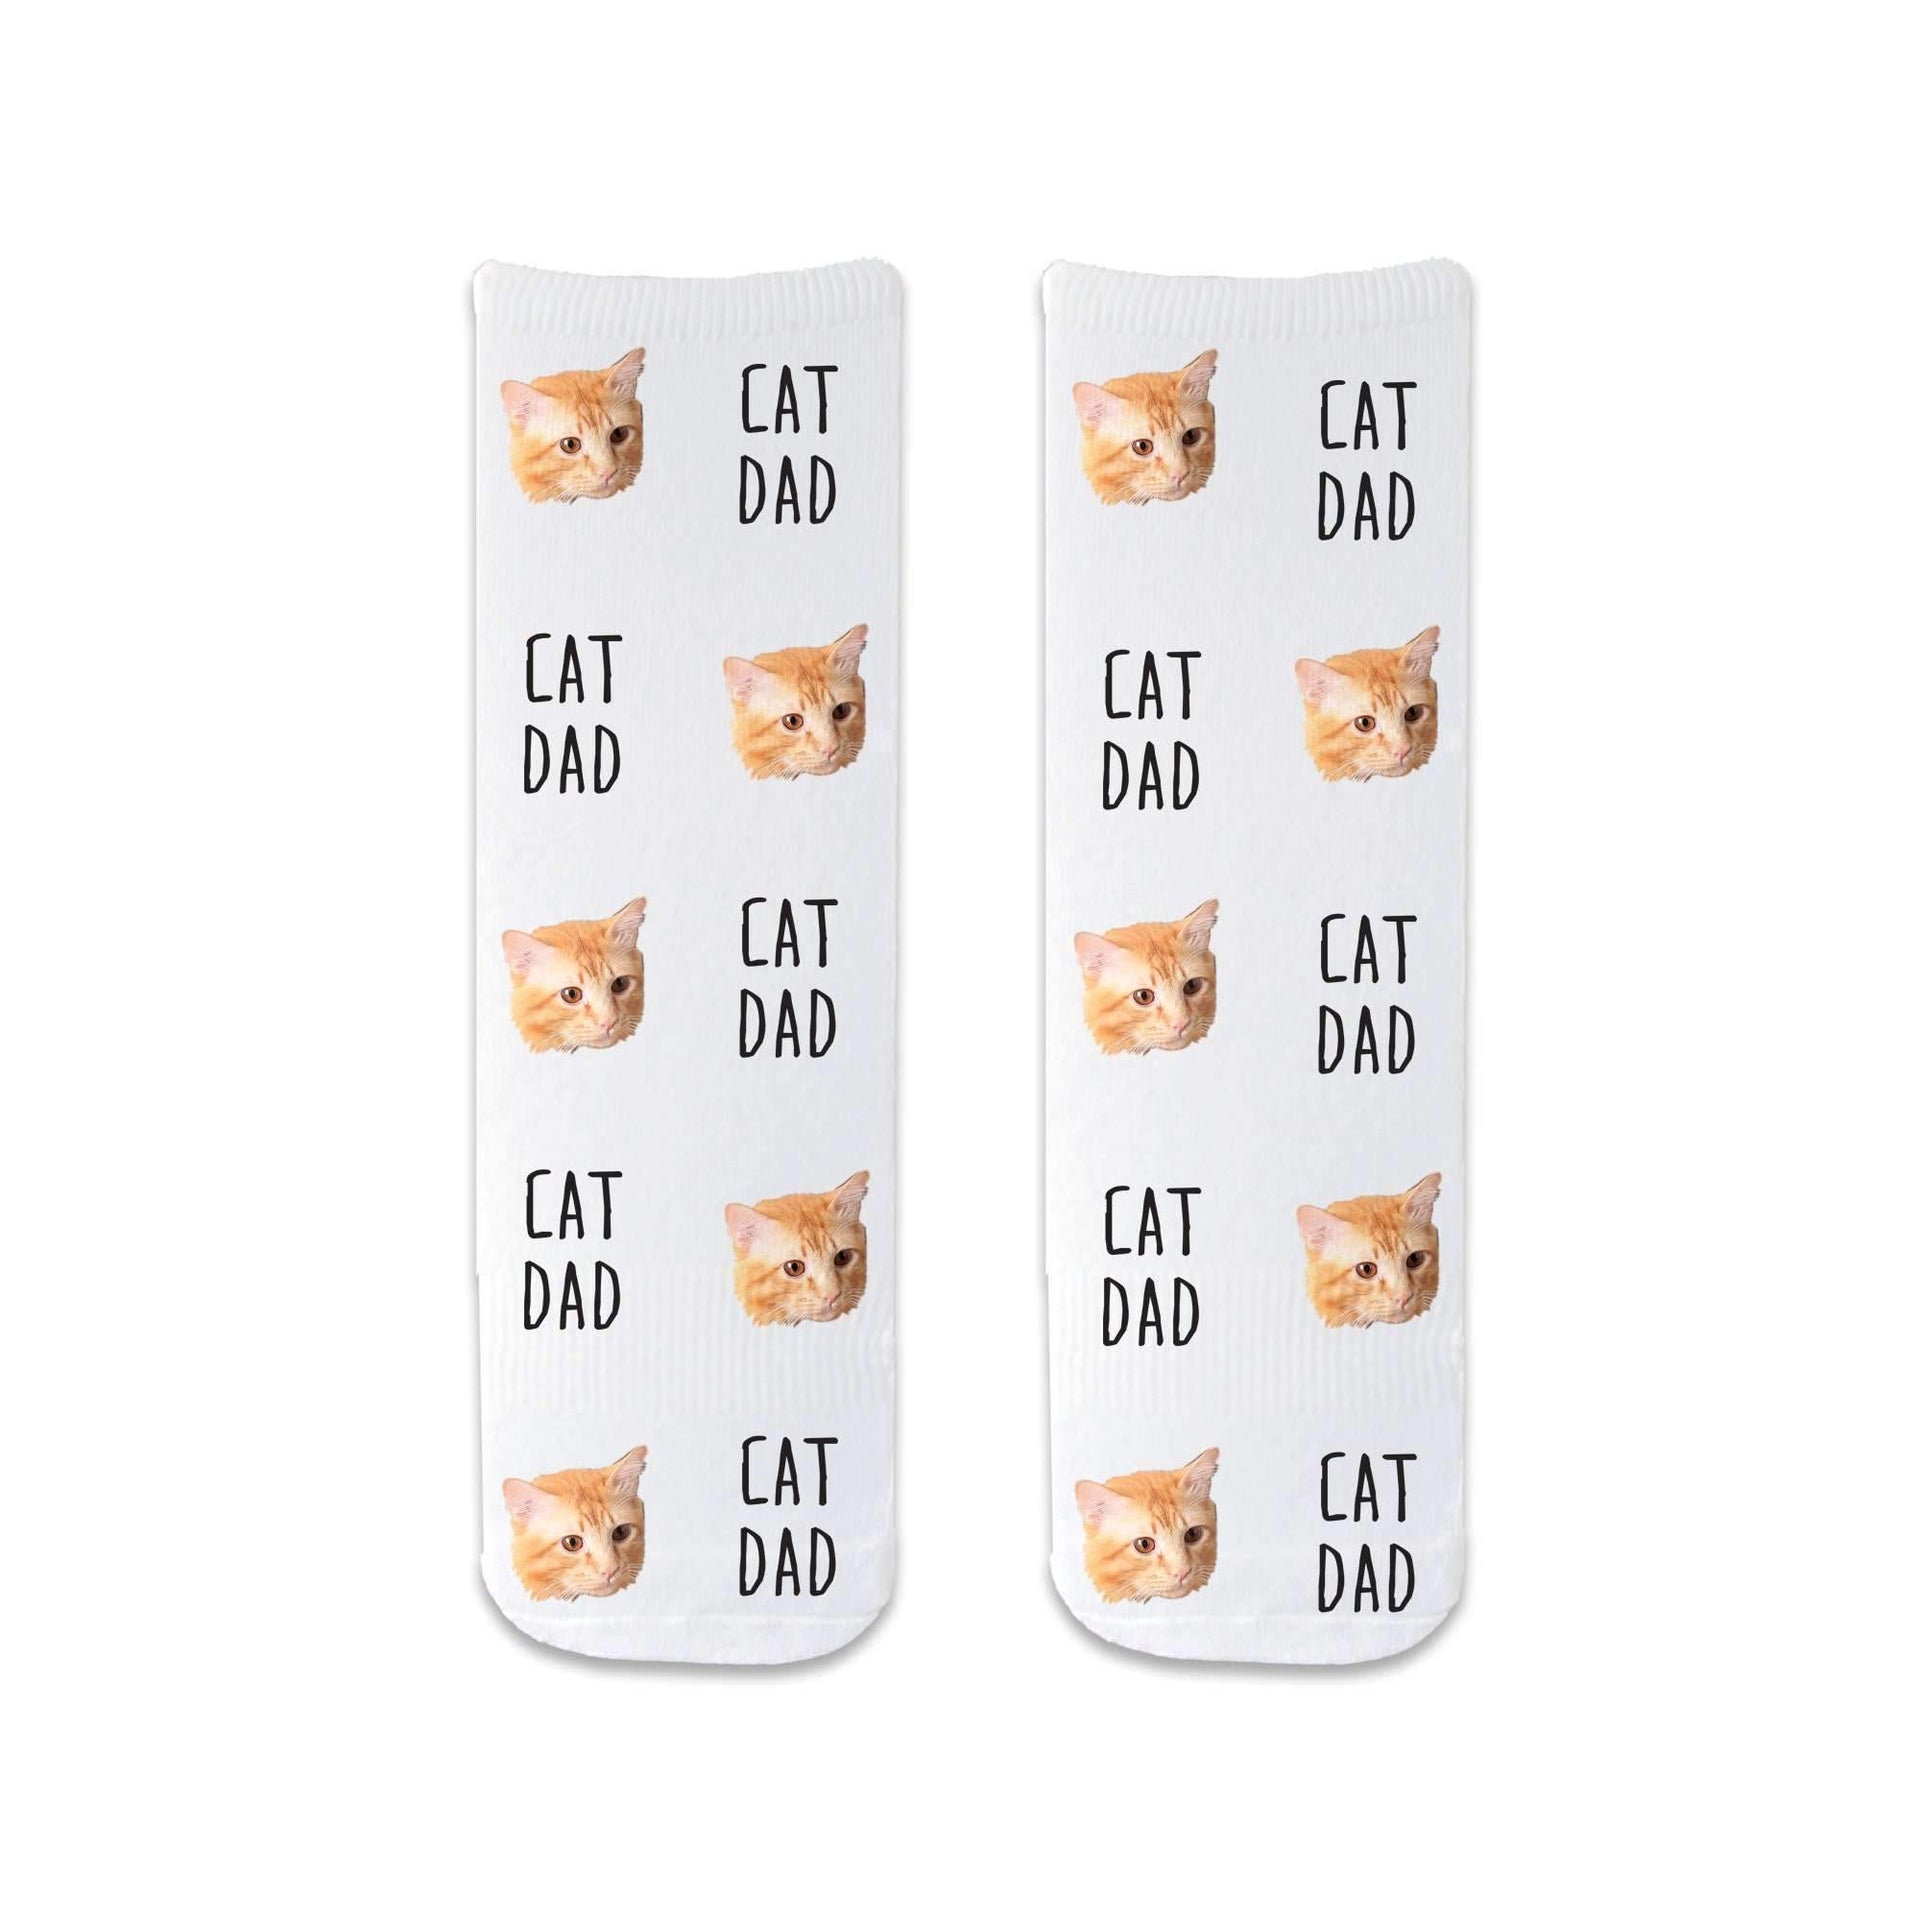 Cat Dad text and your pets photo face digitally printed all over the short cotton crew socks.